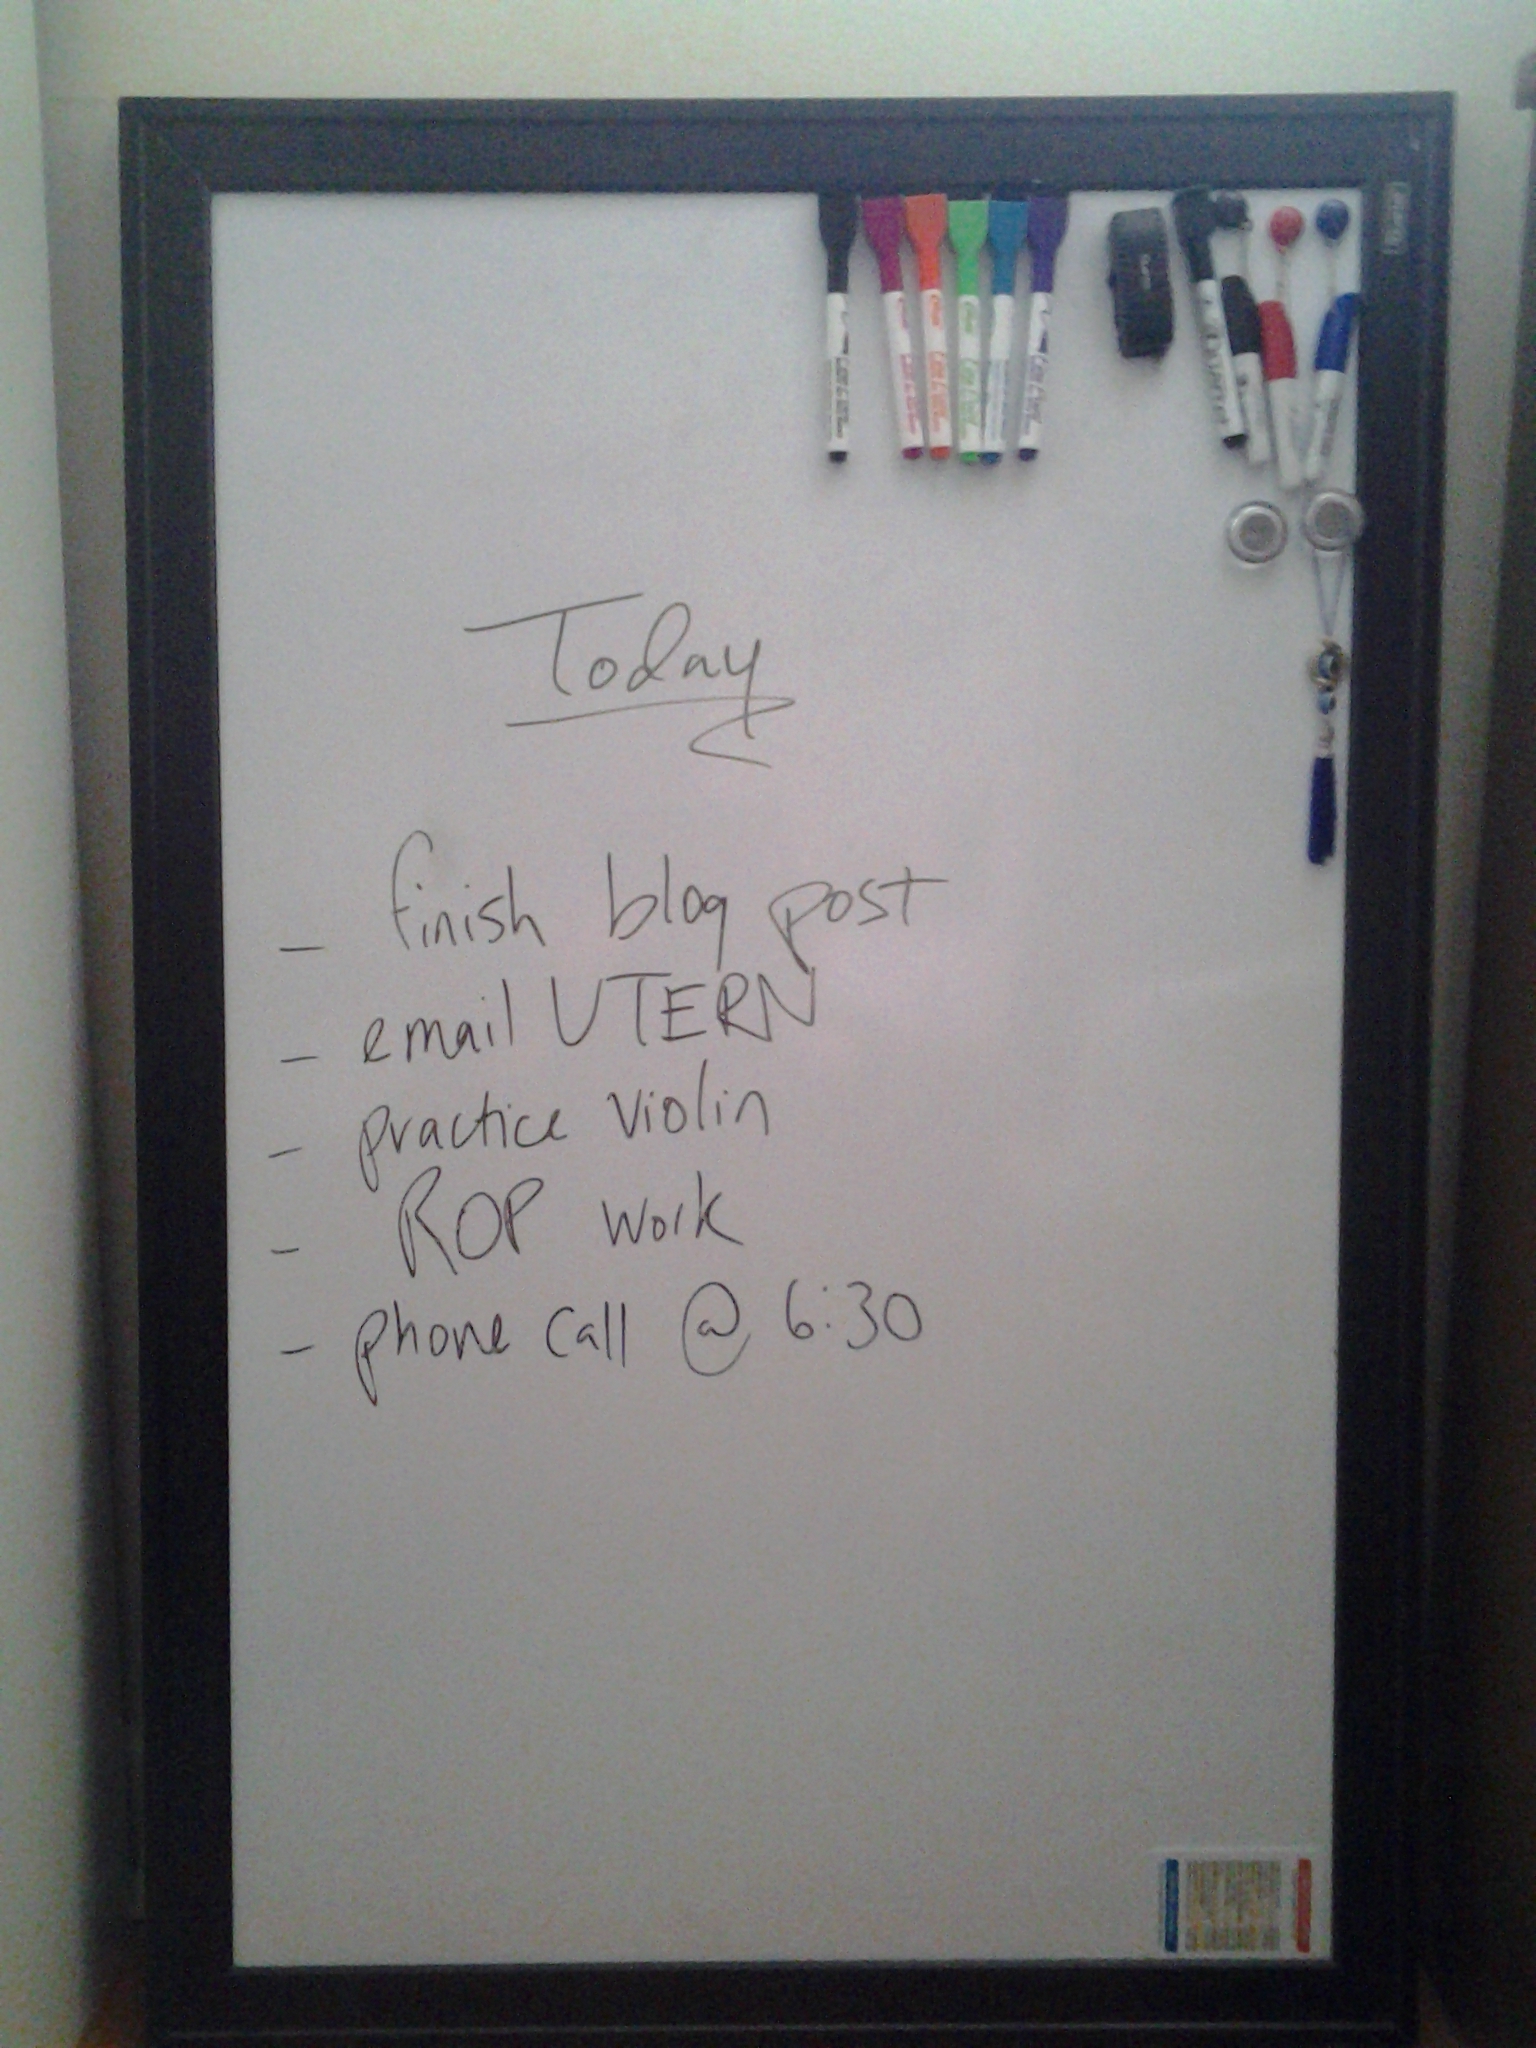 A picture of my whiteboard. Caption: An example of how I use my whiteboard